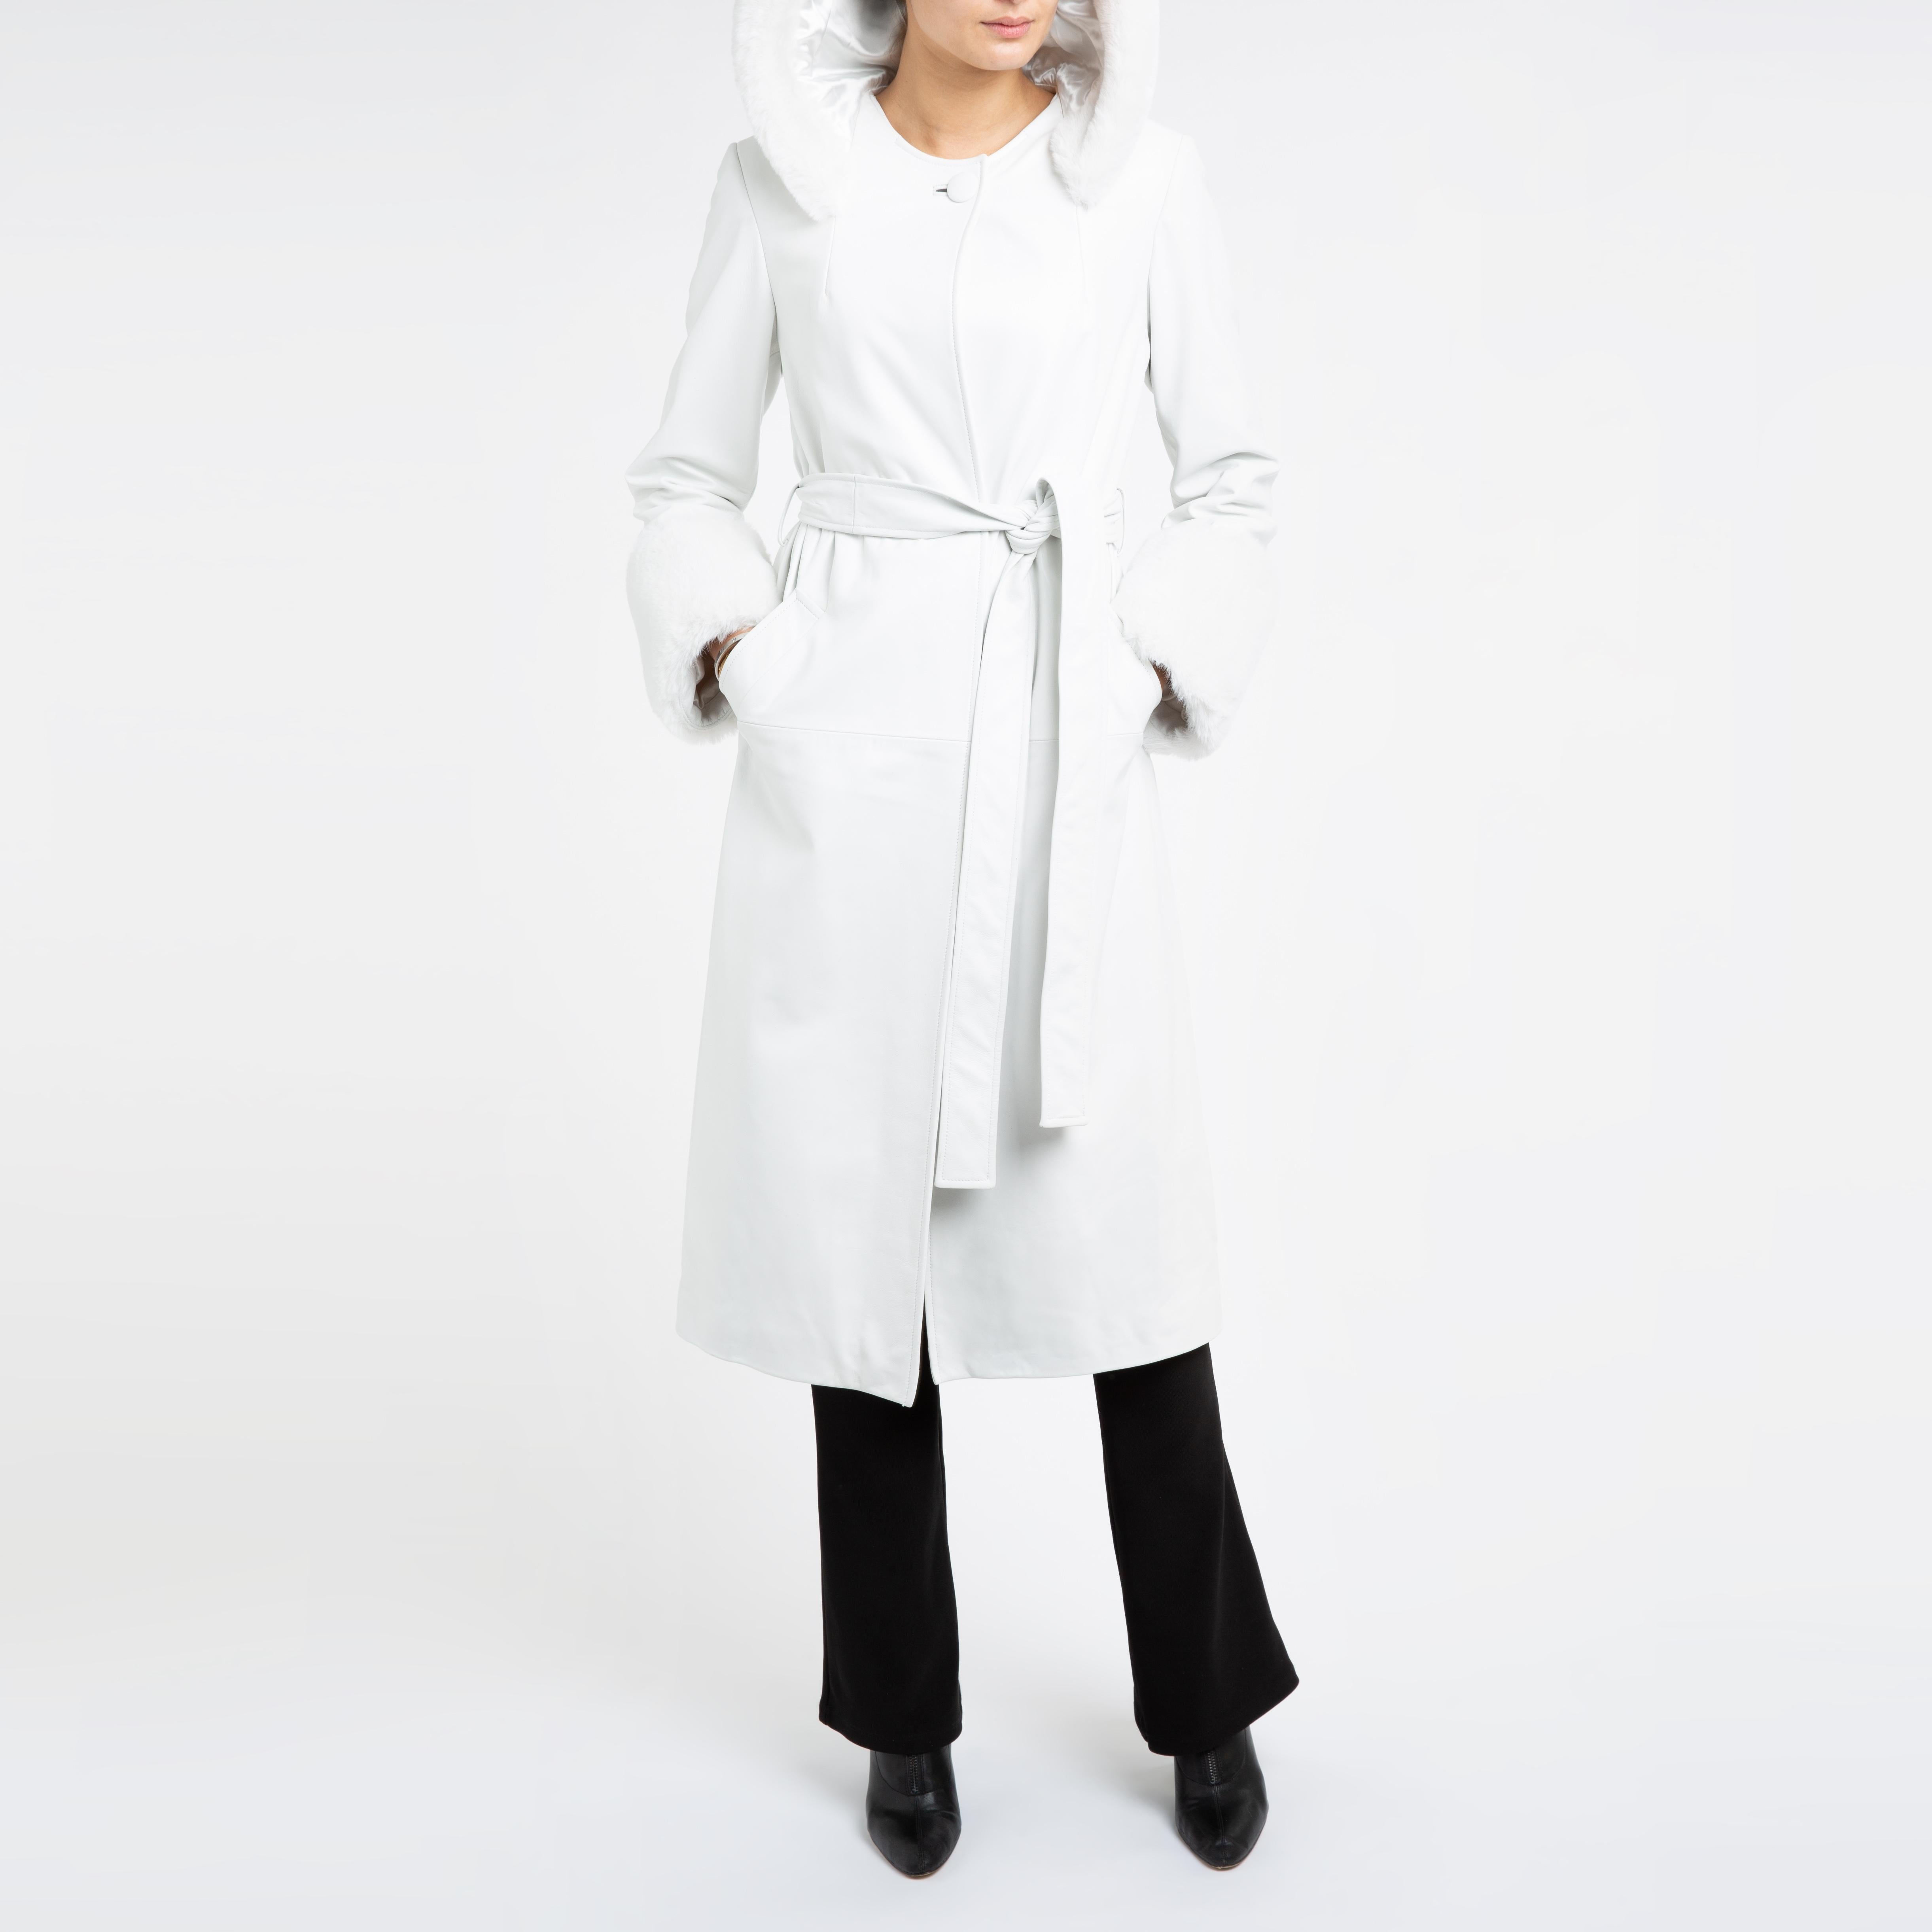 Verheyen Aurora Hooded Leather Trench Coat in White with Faux Fur - Size uk 12  For Sale 5